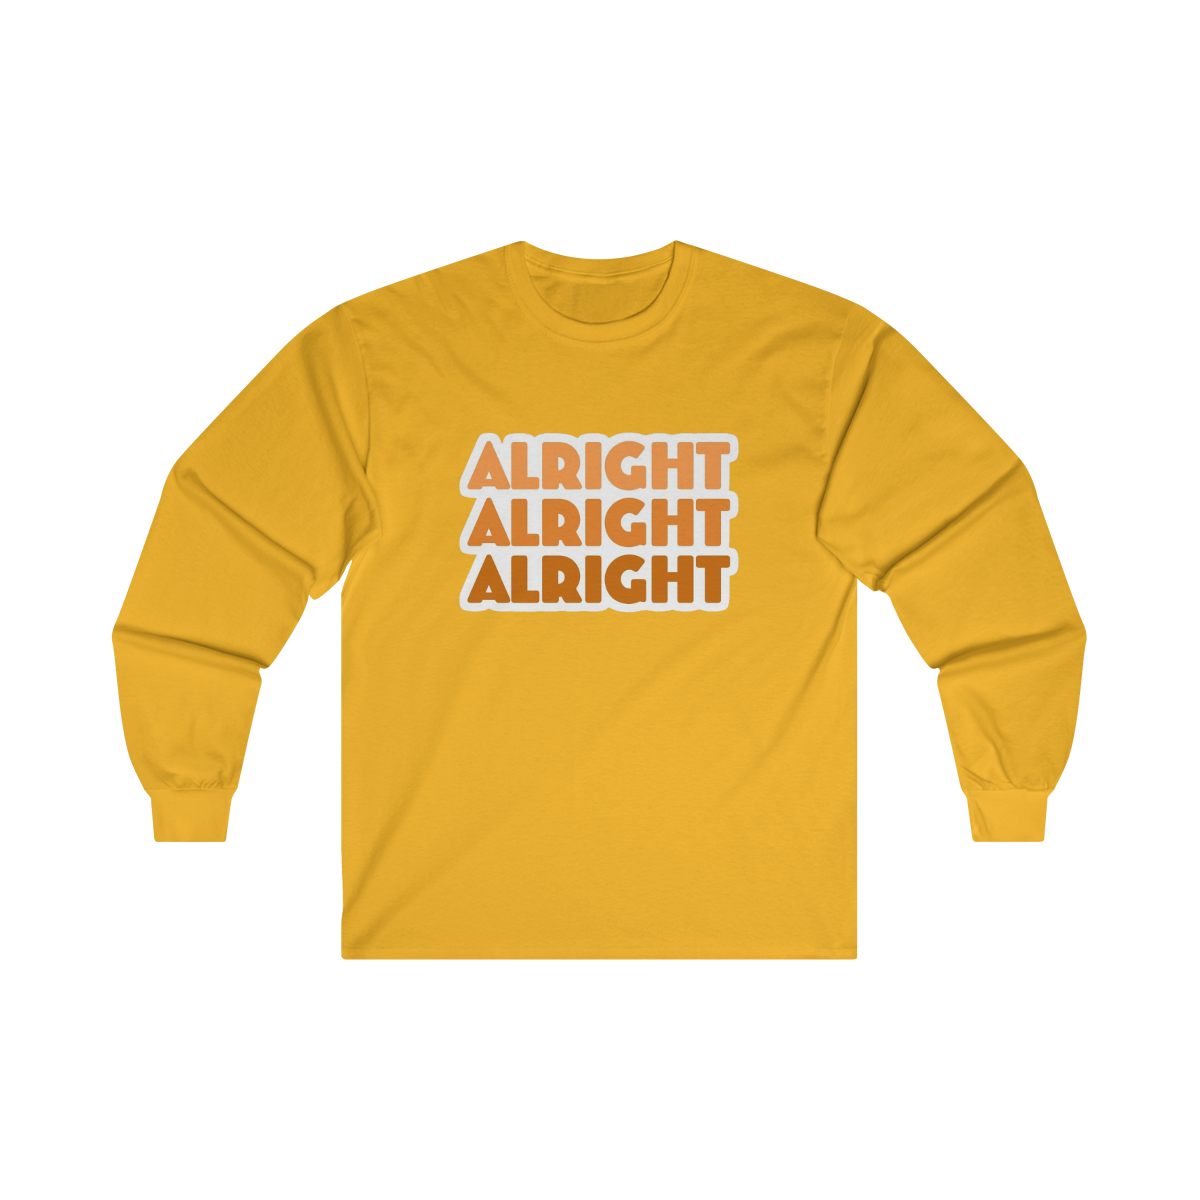 Alright Alright Alright.Ultra Cotton Long Sleeve Tee